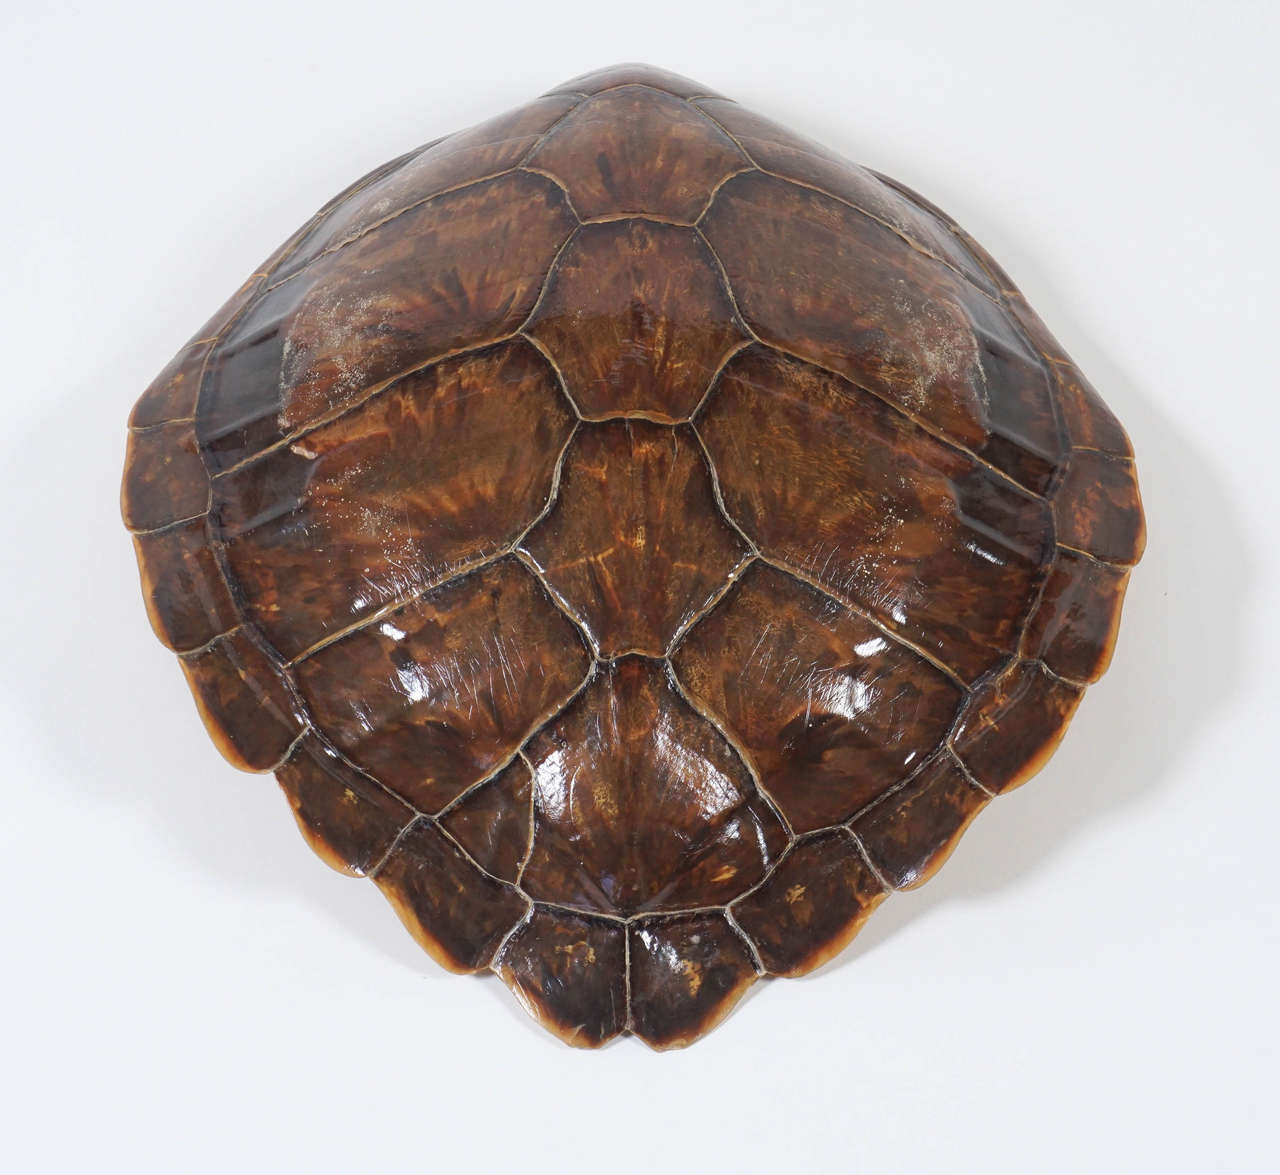 19th century tortoise / turtle shell or carapace of large size and beautiful coloration with reverse mount for wall hanging if desired.